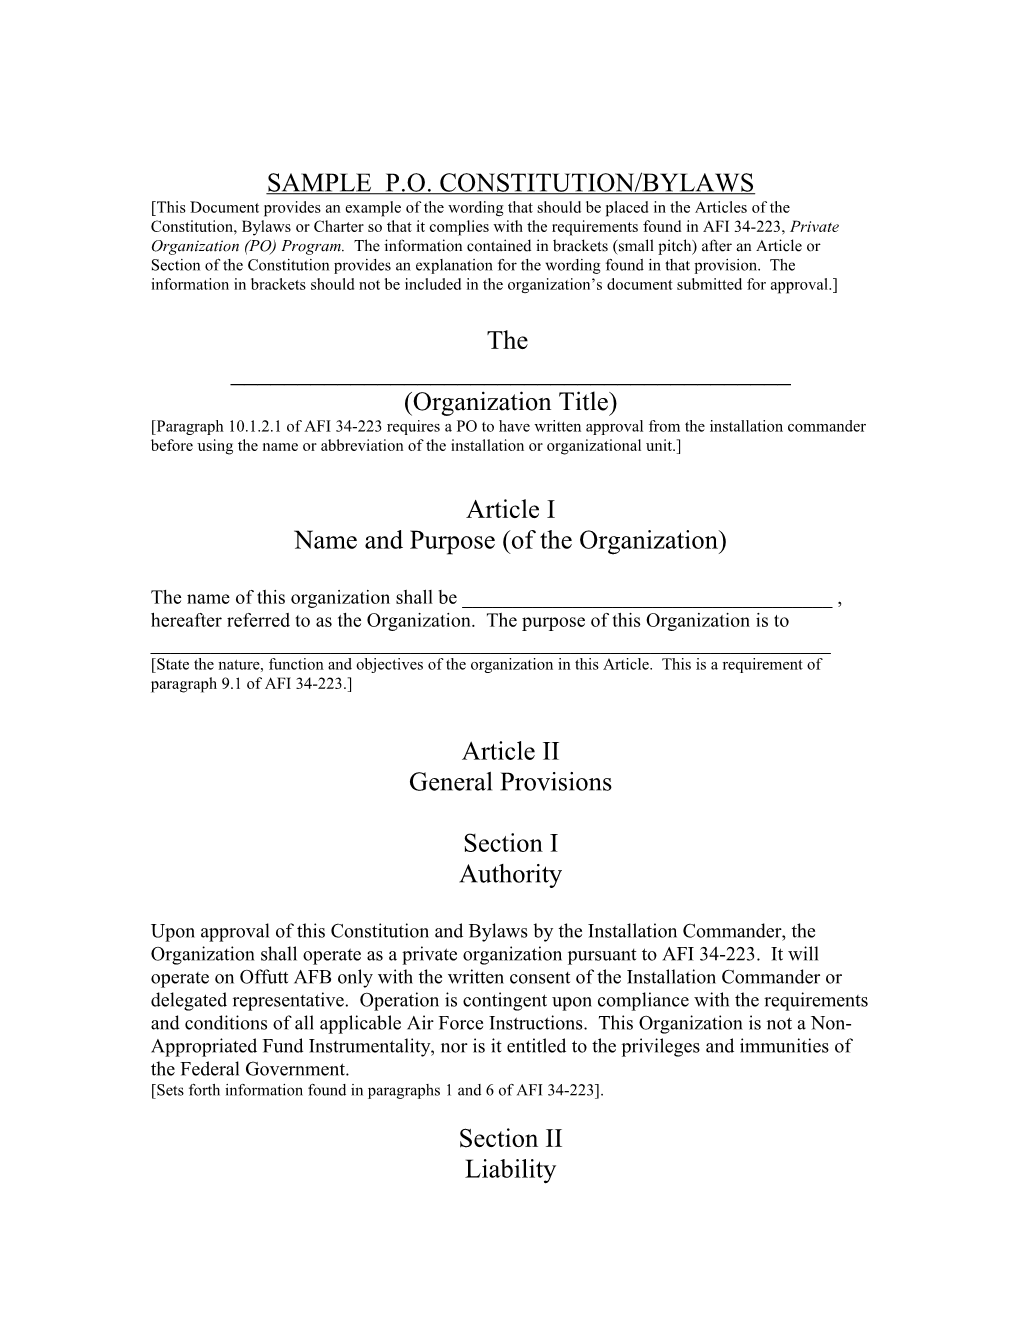 Sample P.O. Constitution/Bylaws